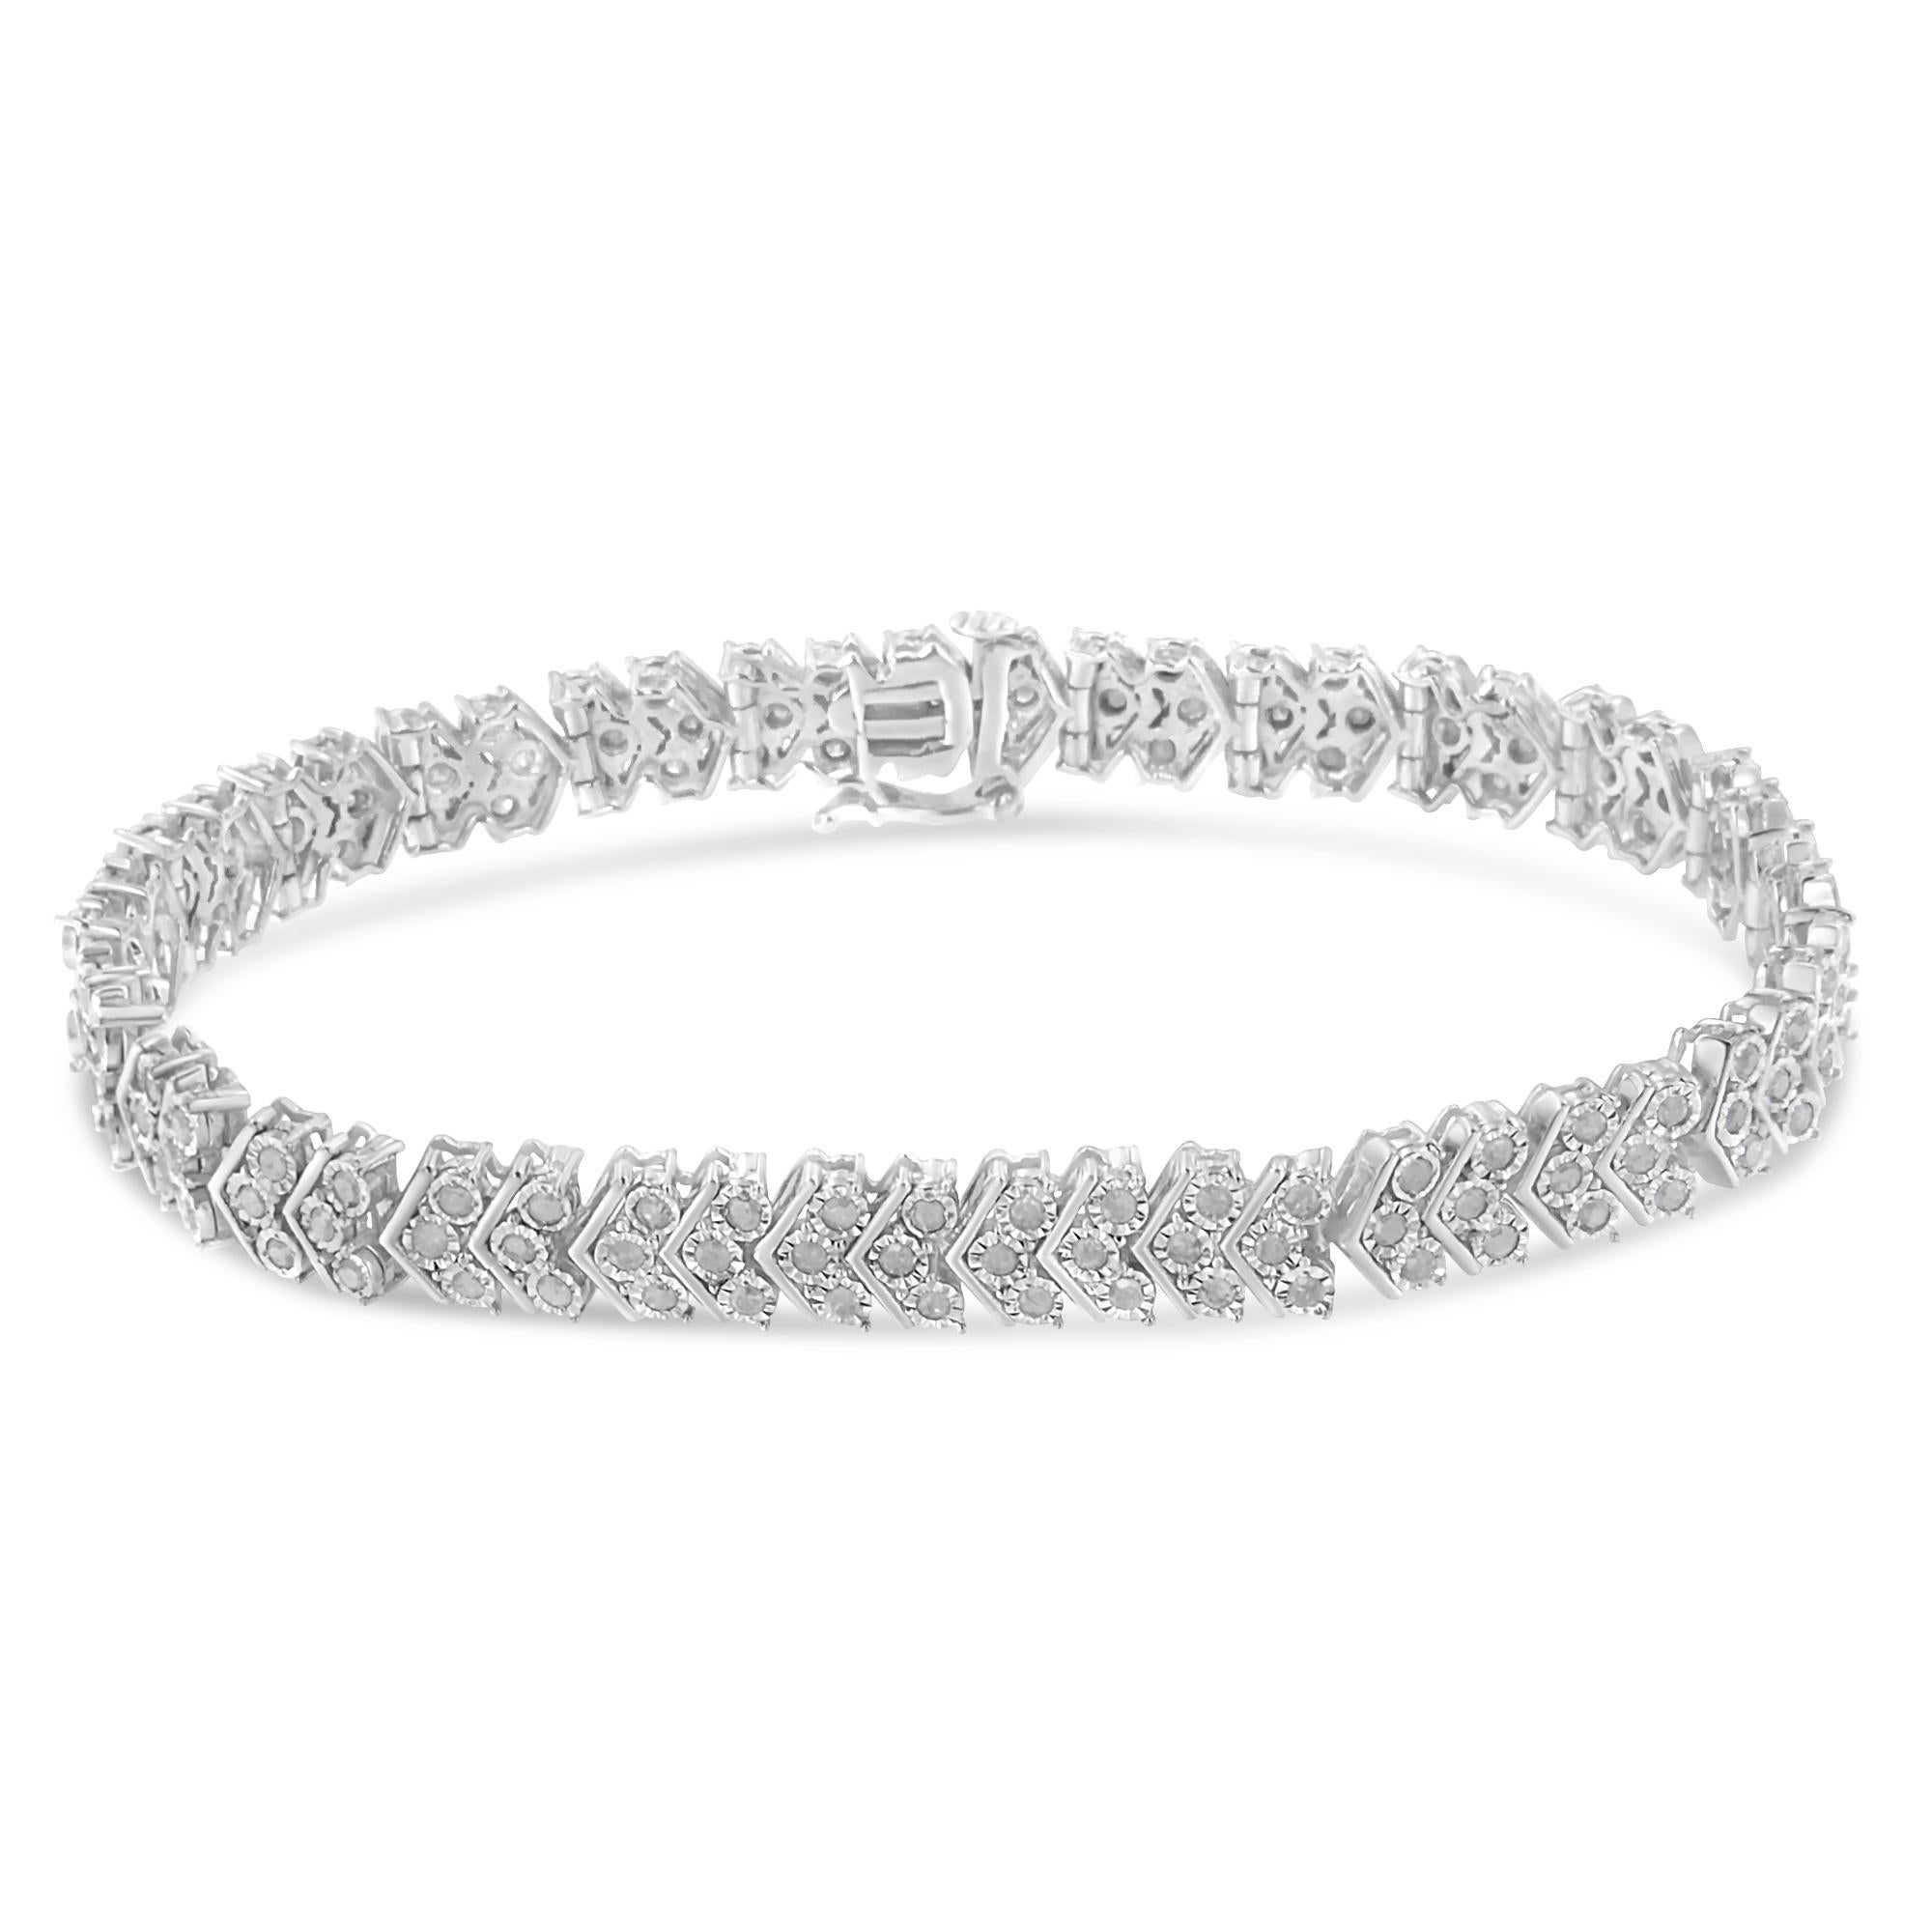 Elegant and timeless, this gorgeous sterling silver link bracelet features 2.17 carat total weight of round, rose cut, promo quality diamonds with 150 stones in all. The tennis bracelet features illusion set diamonds in our unique miracle-plate